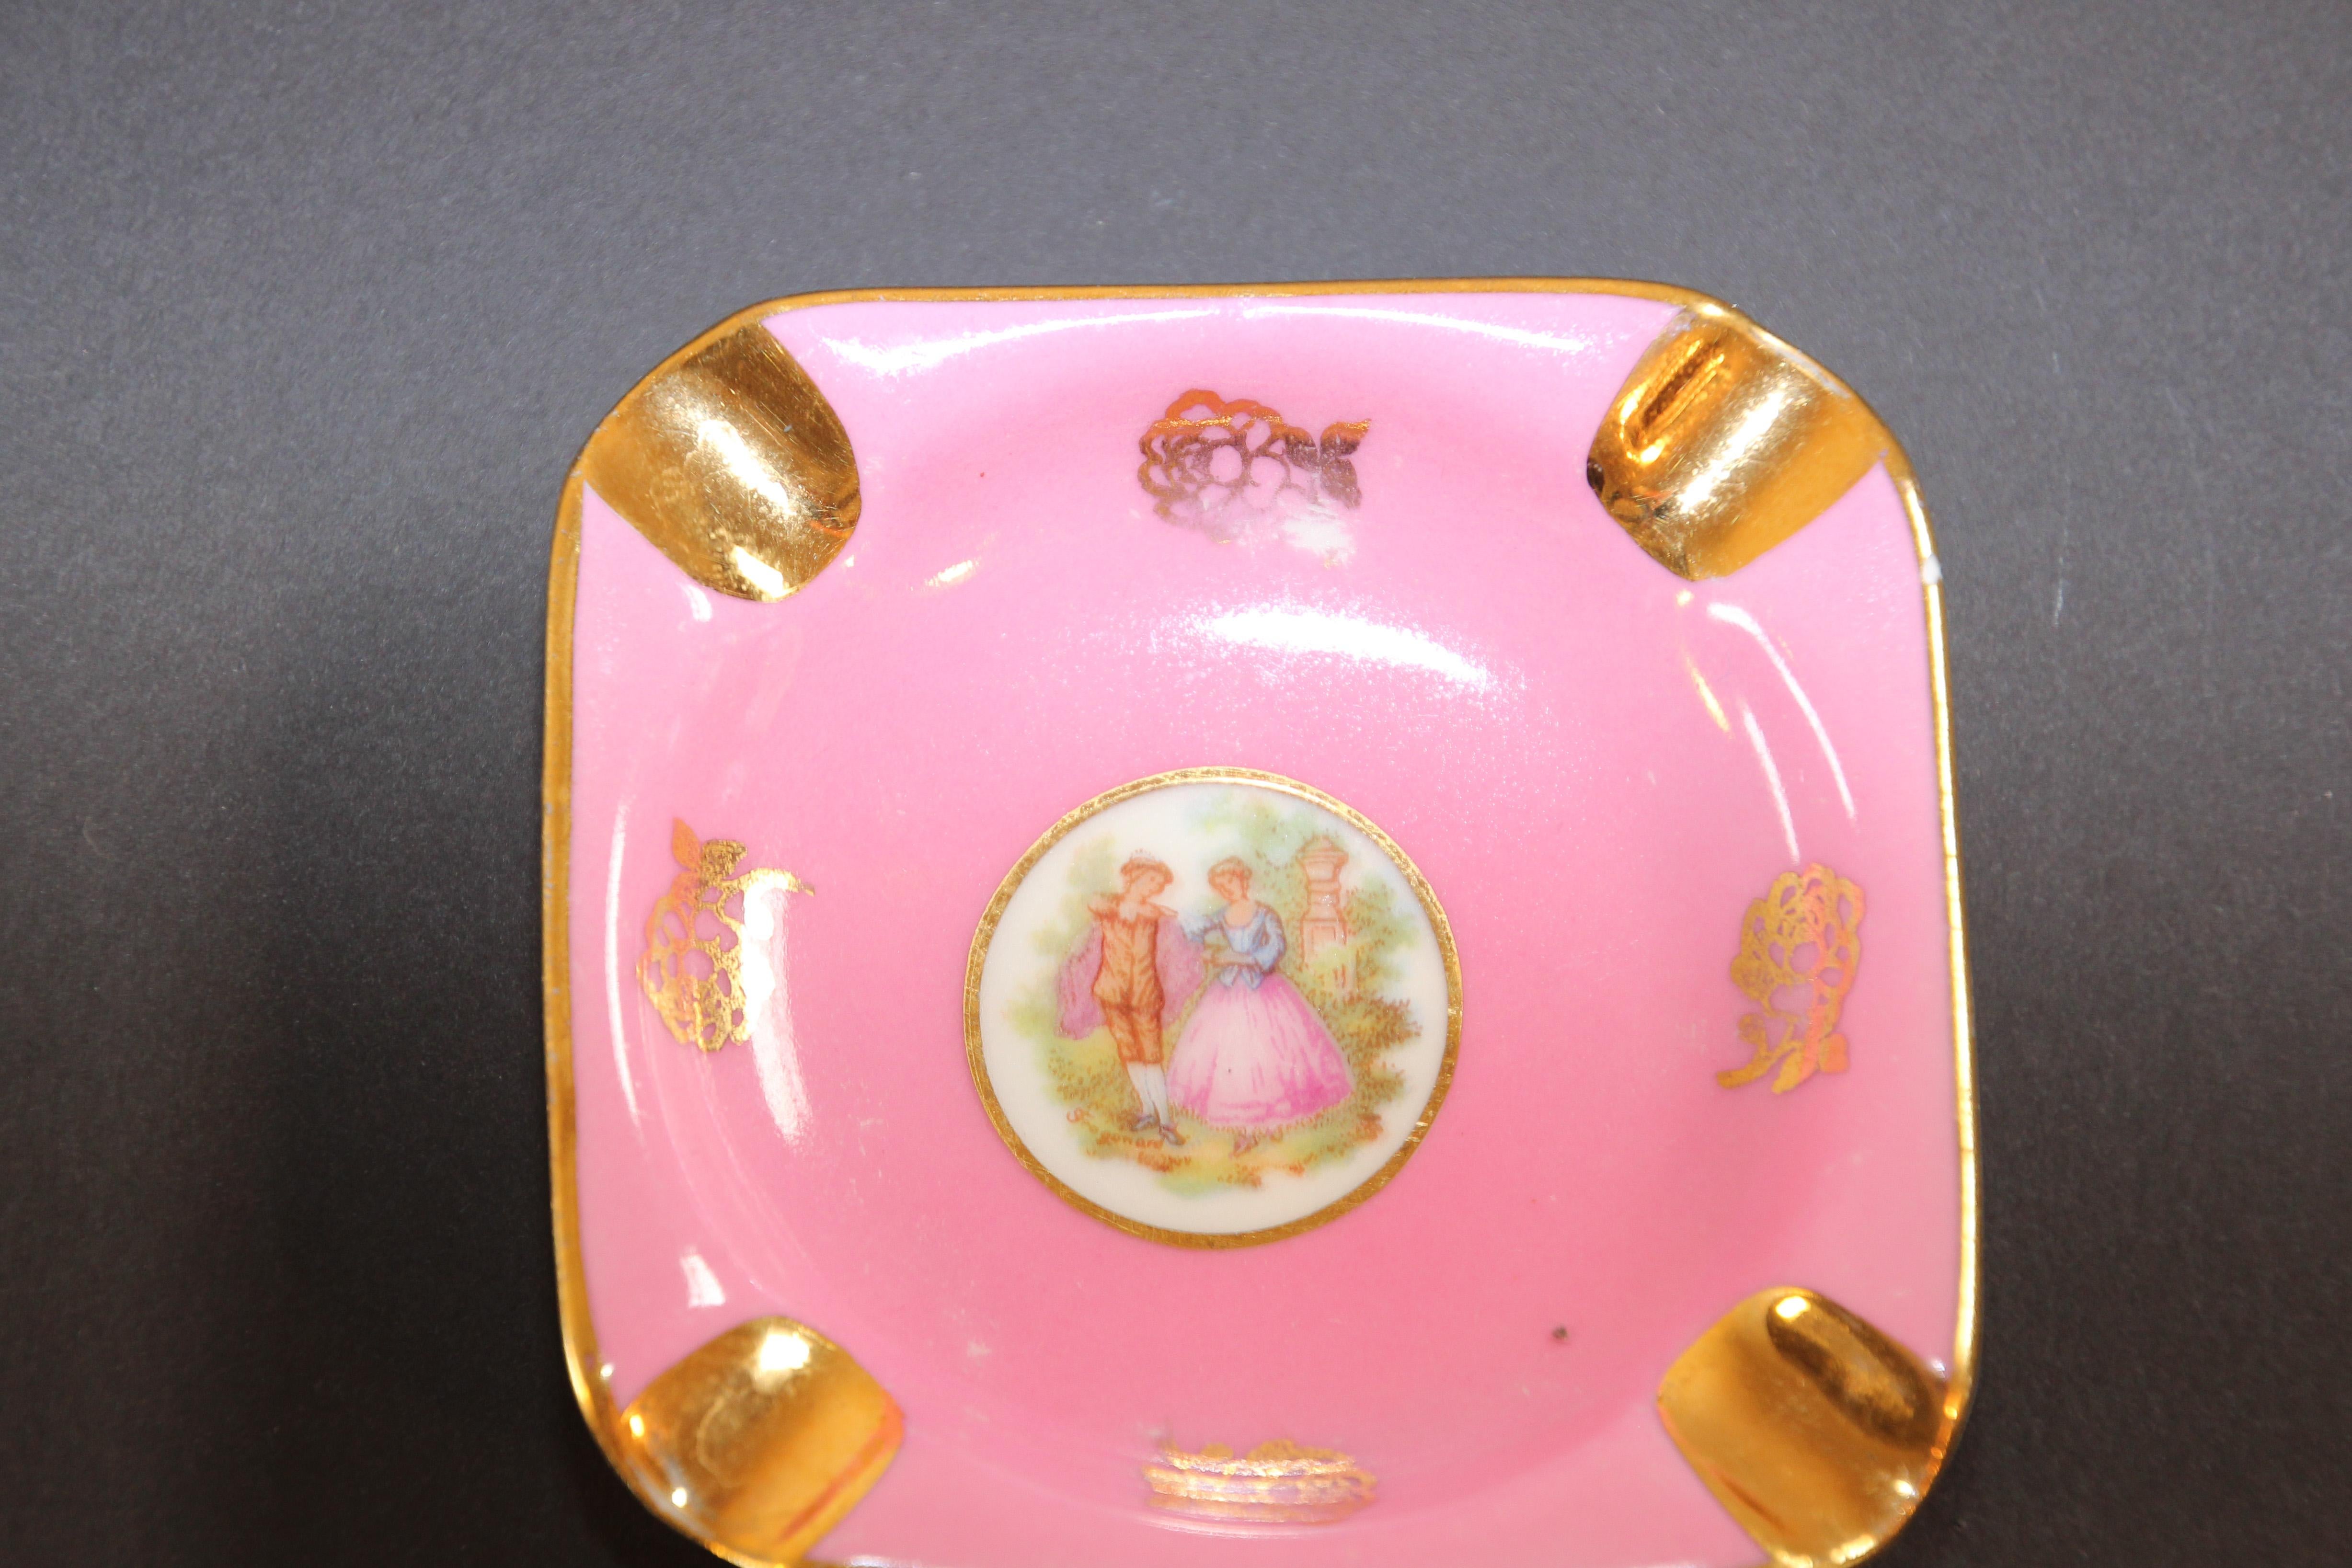 Pair of vintage Bavaria Germany porcelain ashtrays
Elegant precious porcelain ashtrays hand painted couples in the style of Fench artist Fragonard.
One ashtray in royal blue and one pink with gold.
Use it as an ashtray or for decorative